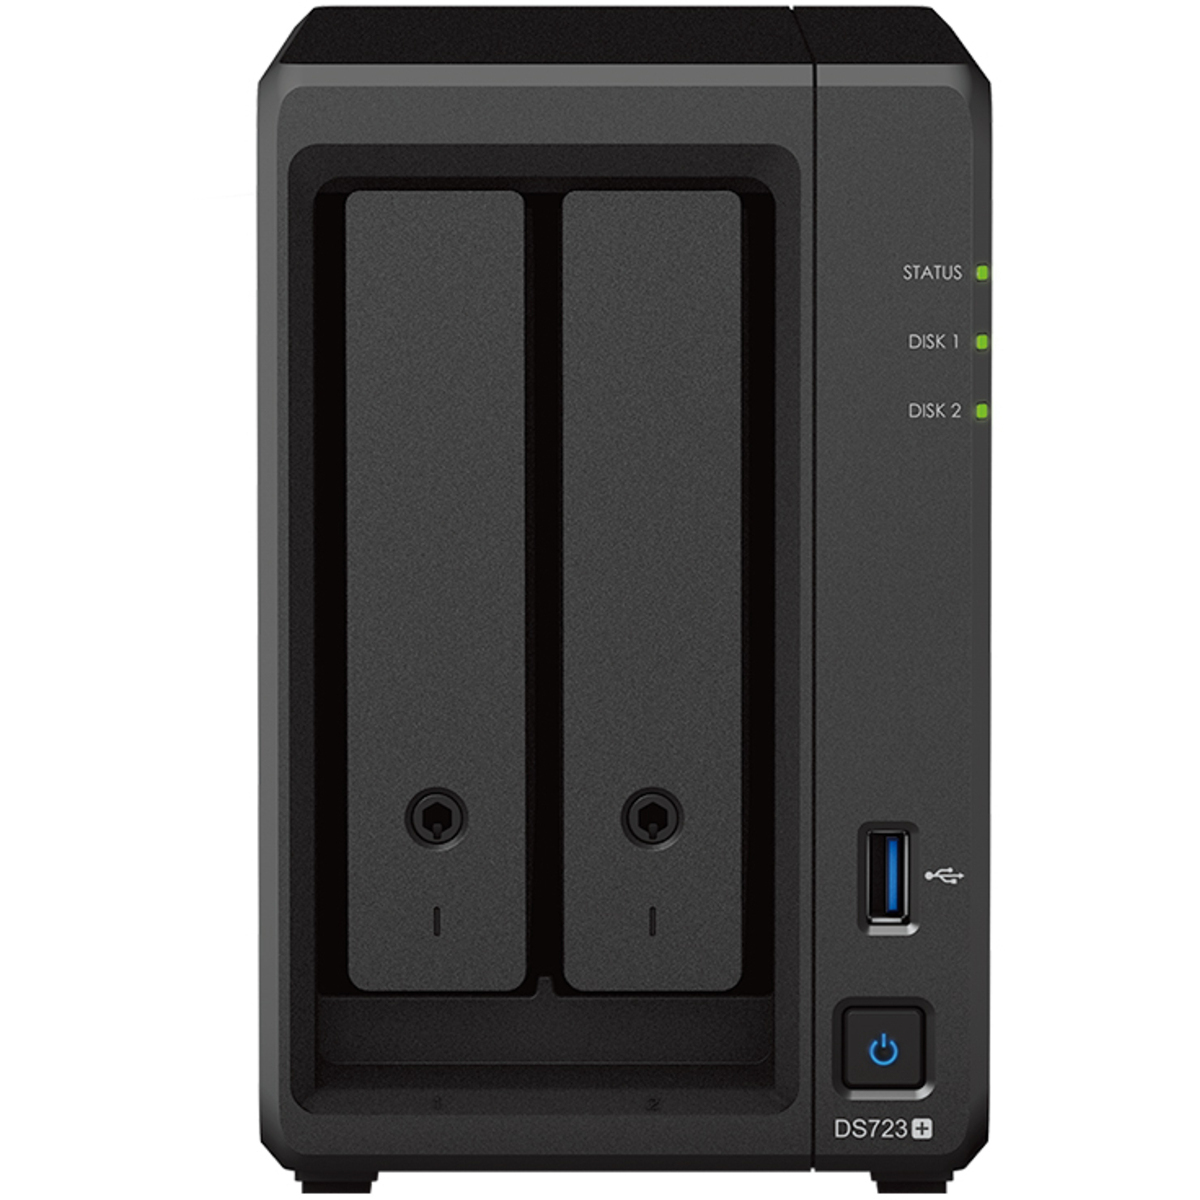 Synology DiskStation DS723+ 4tb 2-Bay Desktop Multimedia / Power User / Business NAS - Network Attached Storage Device 1x4tb Seagate IronWolf Pro ST4000NE001 3.5 7200rpm SATA 6Gb/s HDD NAS Class Drives Installed - Burn-In Tested DiskStation DS723+